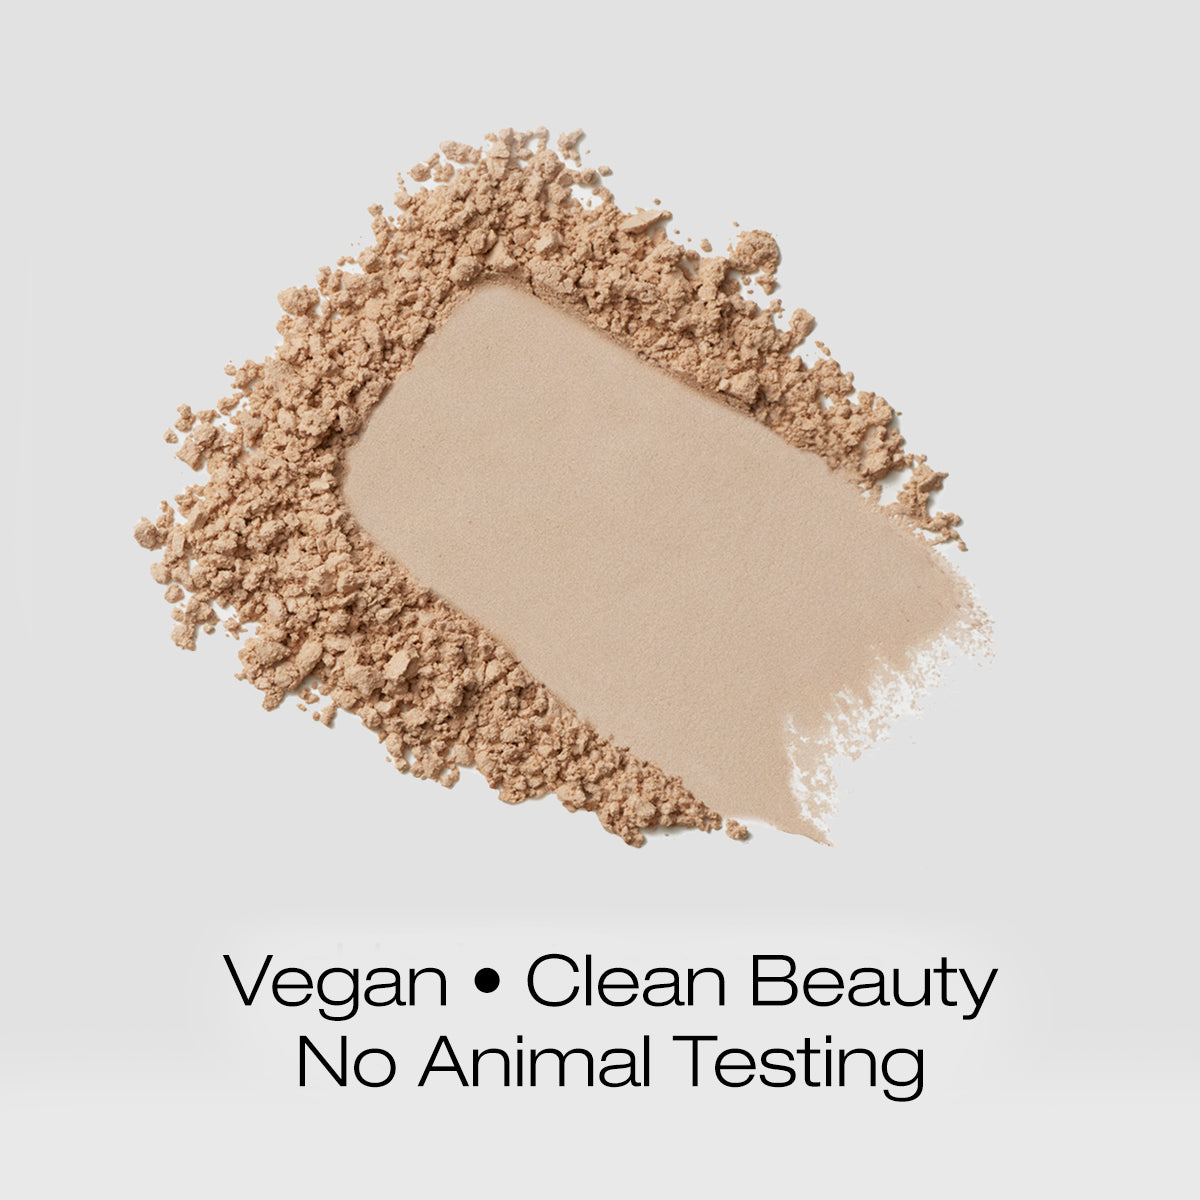 a swatch of light colored foundation powder indicating that the formula is vegan, clean beauty and is not tested on animals